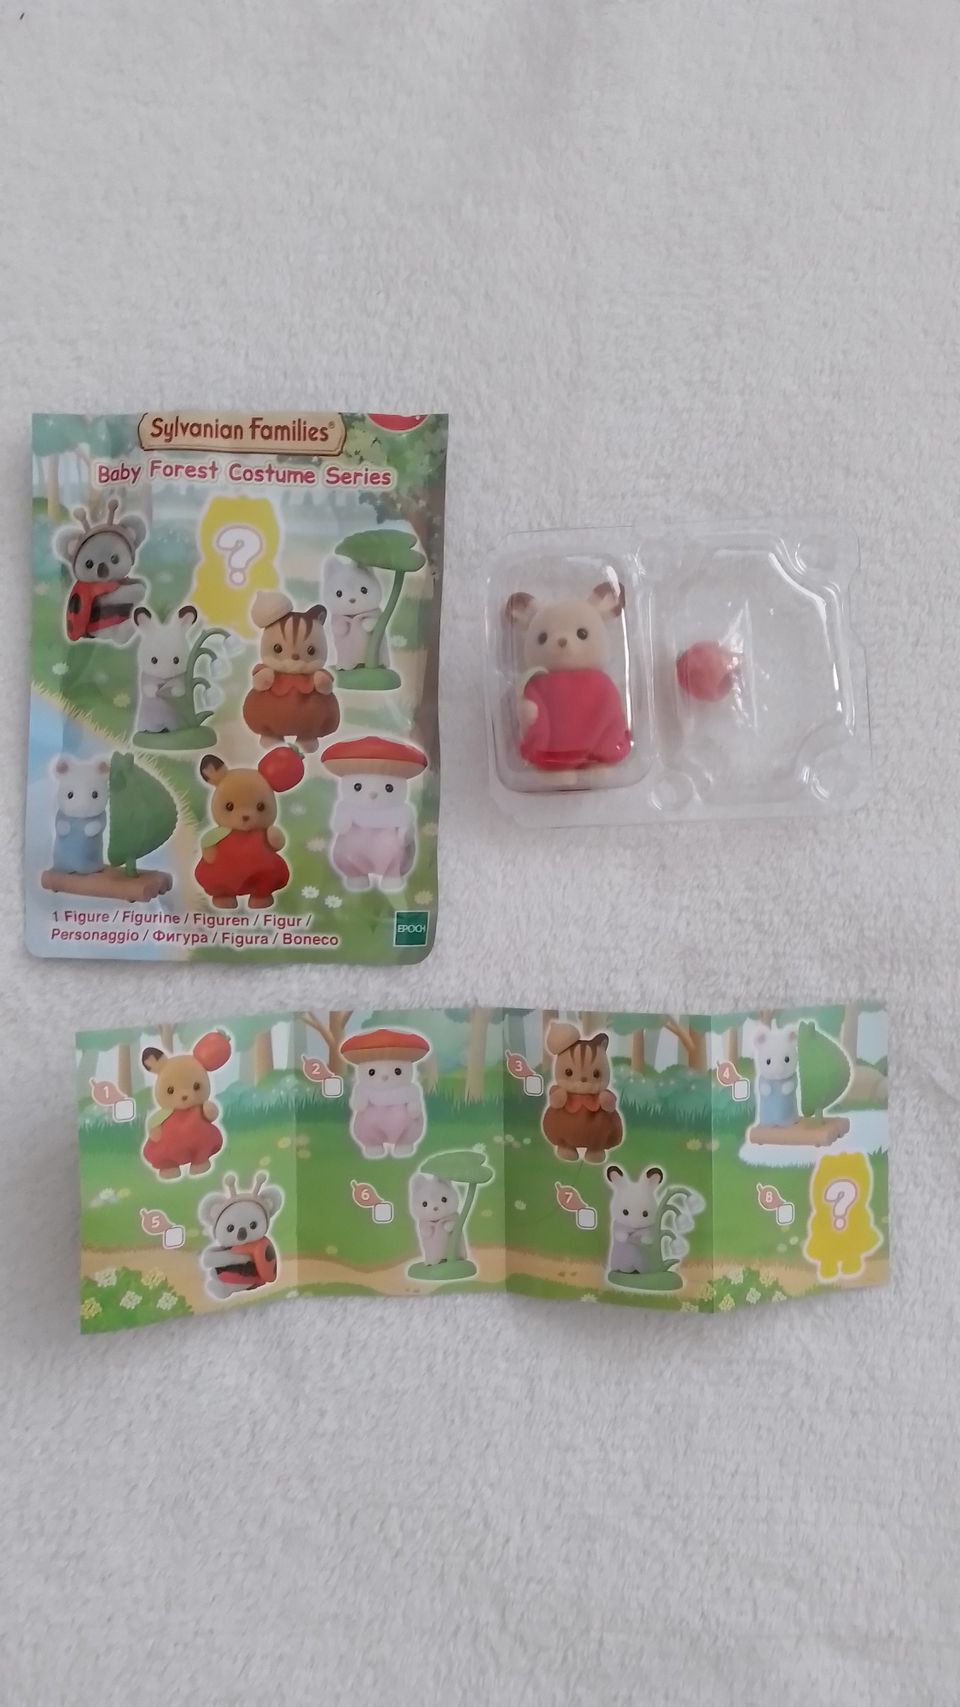 Sylvanian families baby forest costume hahmo 1